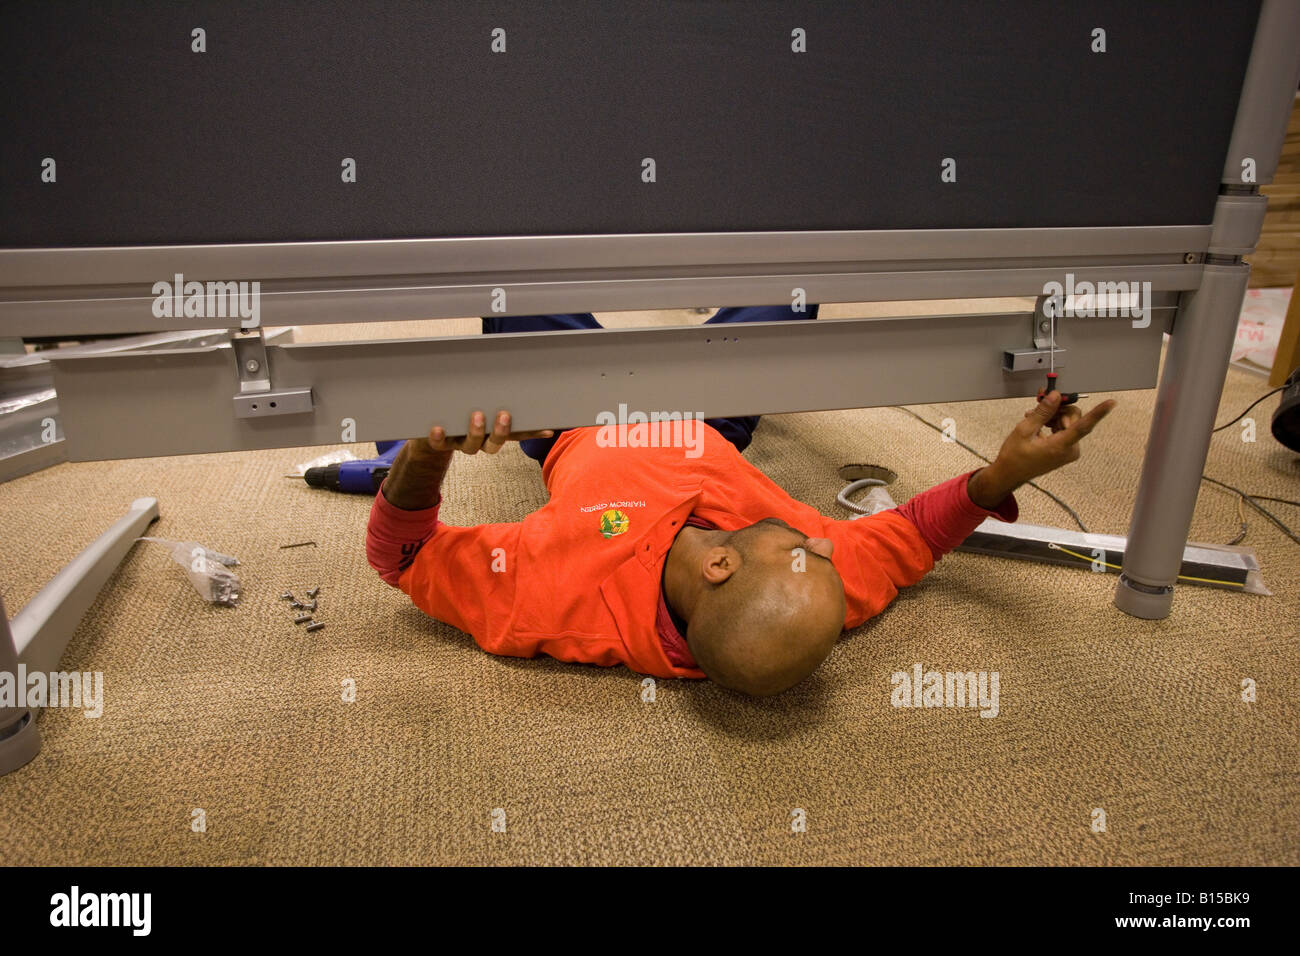 A workman lies on the floor to secure a desk fitting in a newly constructed office building. Stock Photo